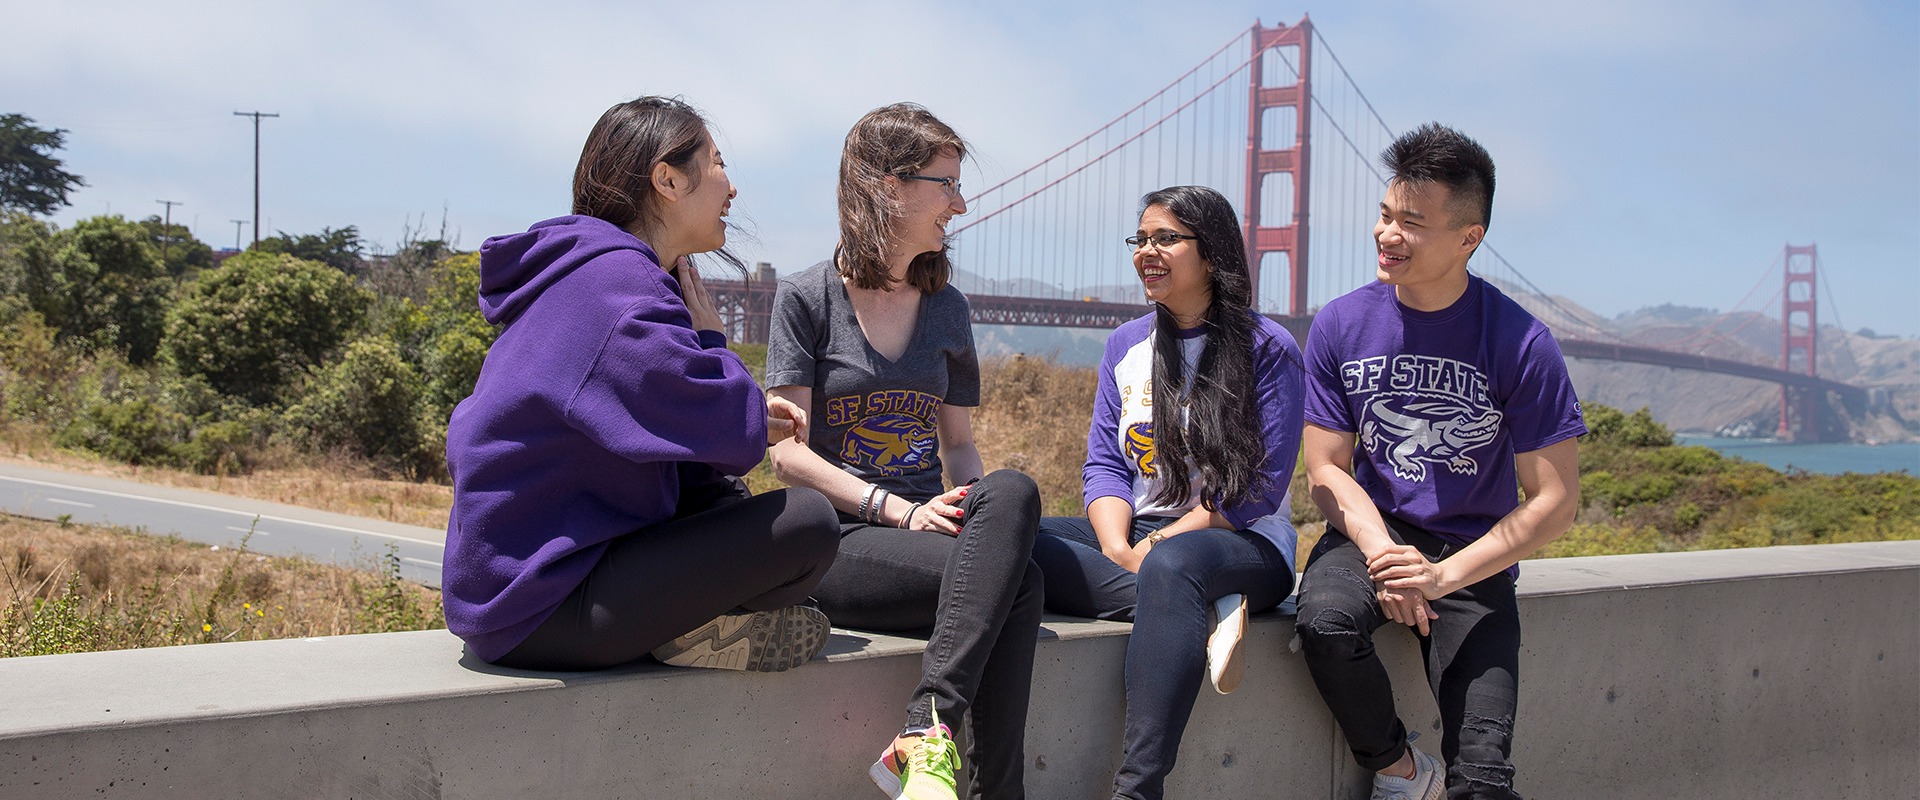 Students talking with Golden Gate Bridge in background